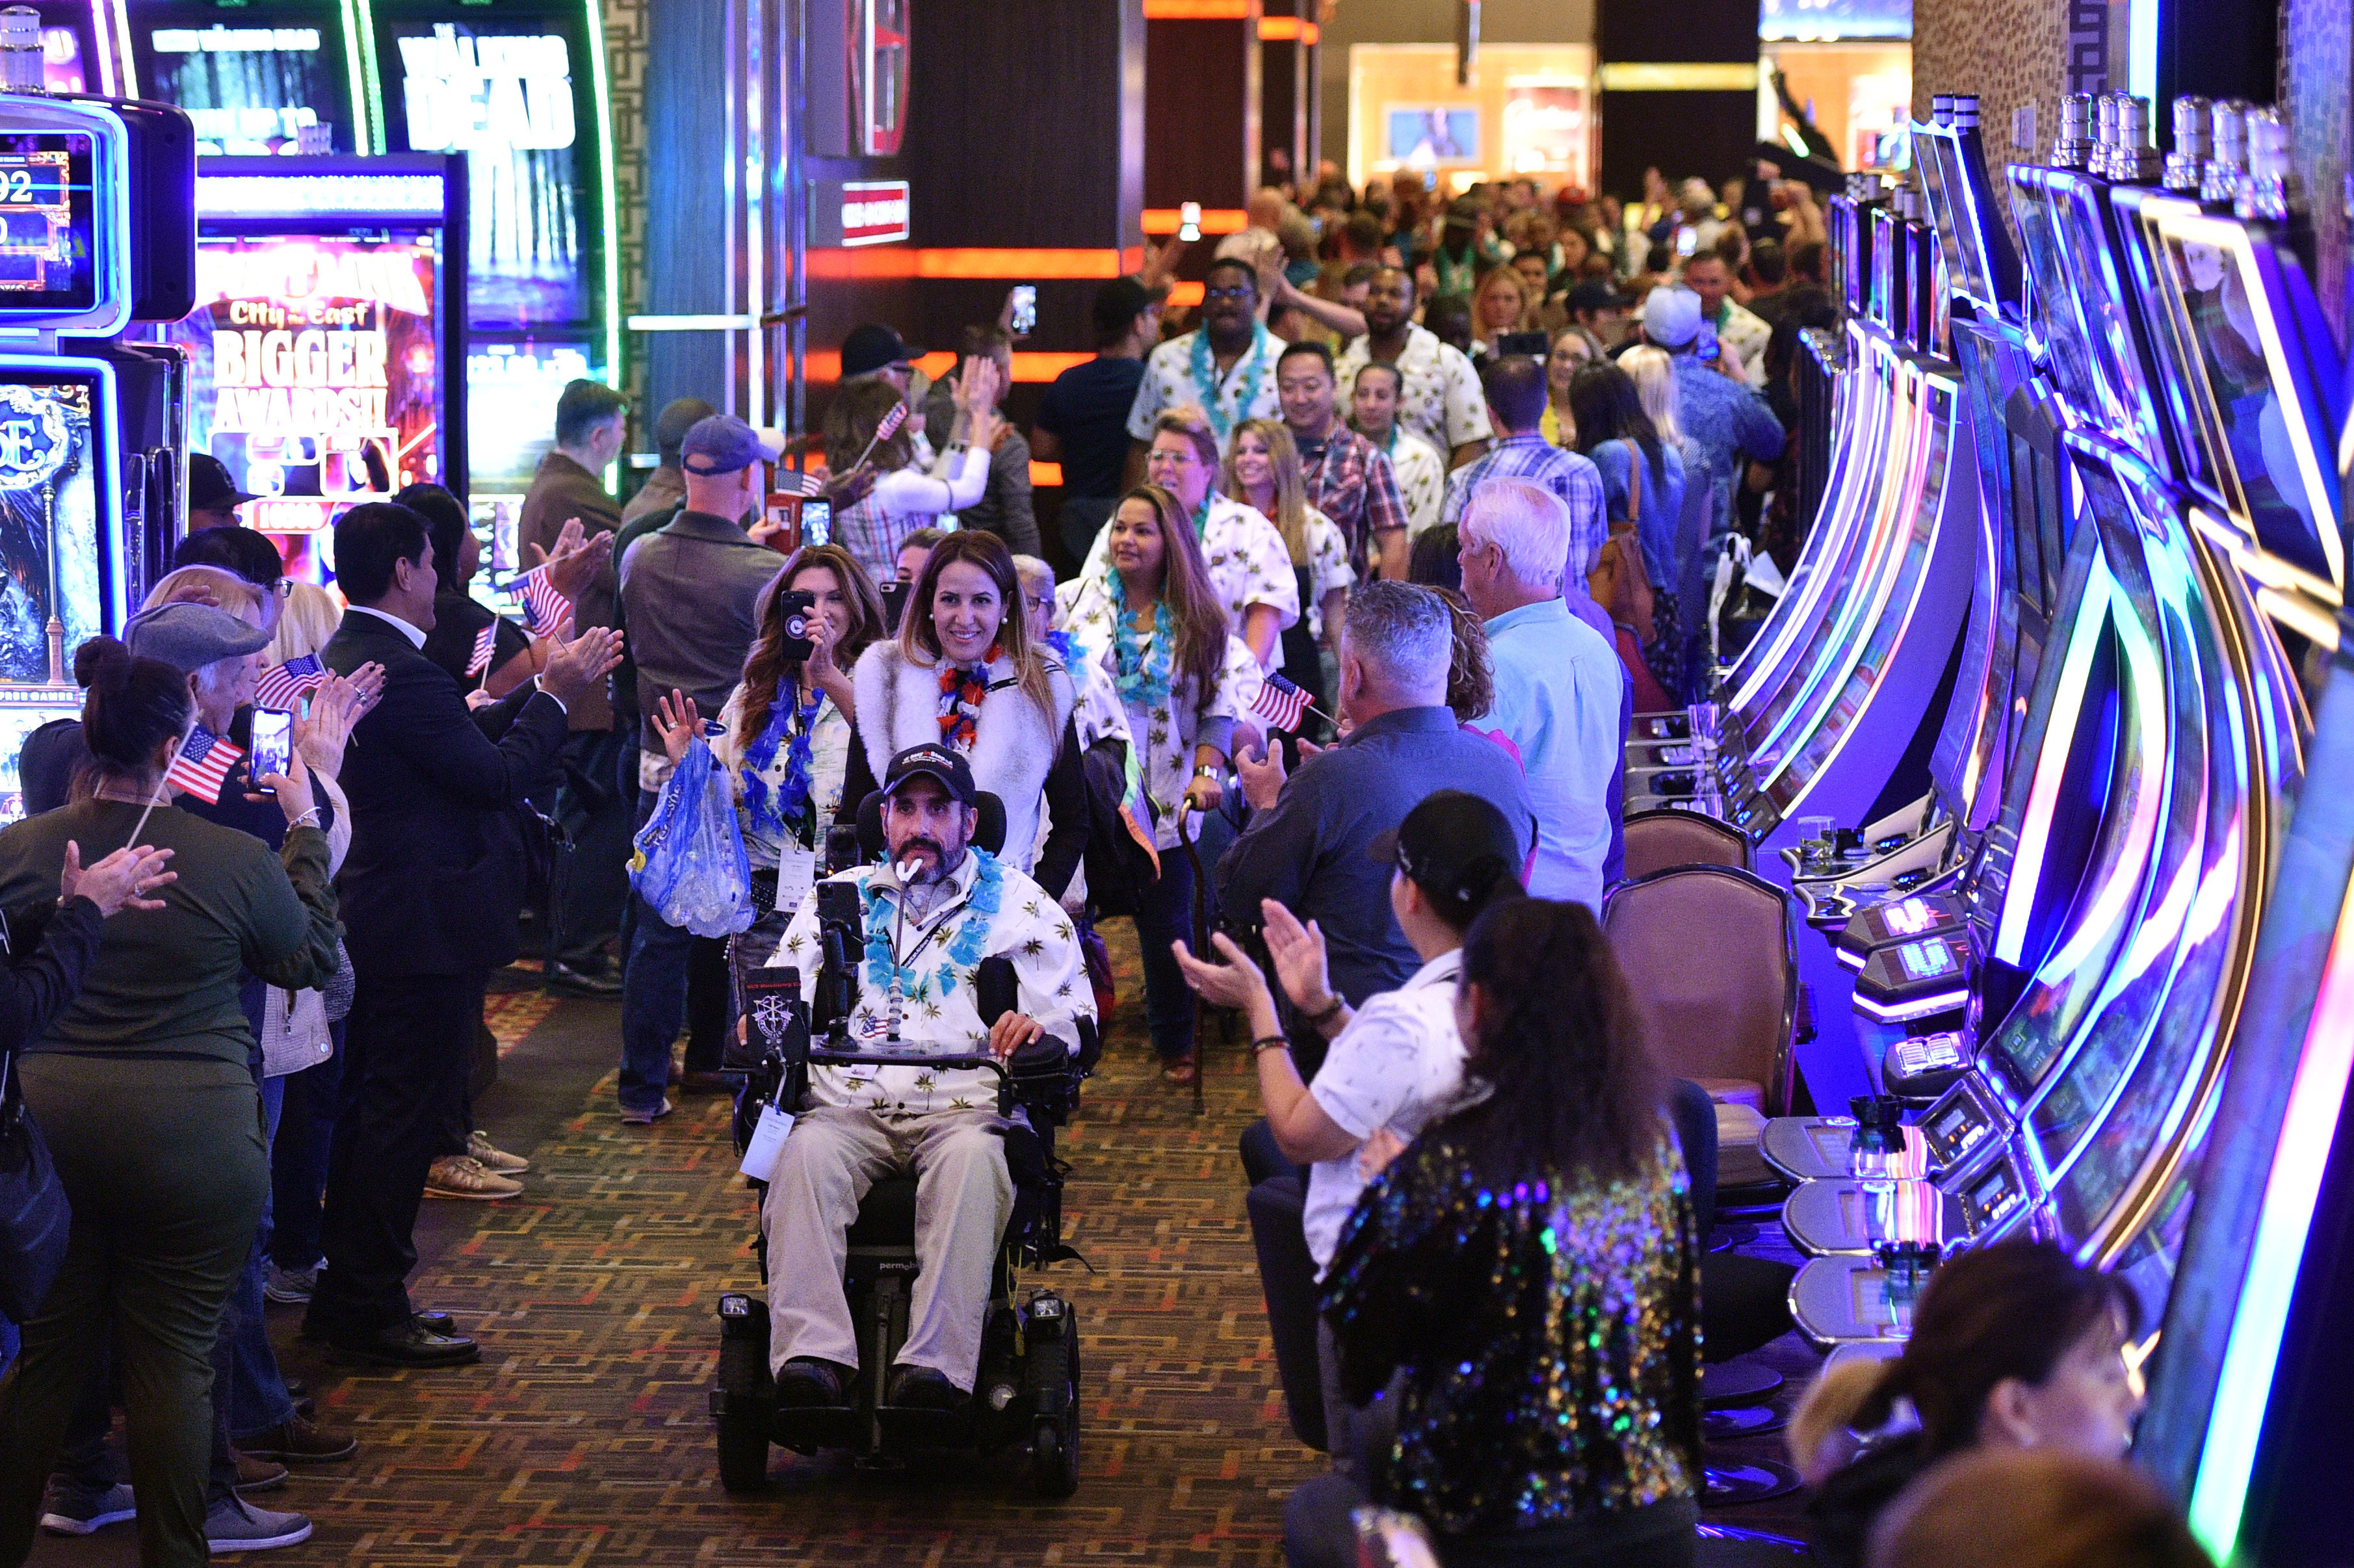 U.S. Army veteran Romy Camargo of Florida is wheeled through the “Walk of Gratitude” as part of the Salute the Troops event in Las Vegas, Nevada, on November 9, 2019. | Source: Getty Images